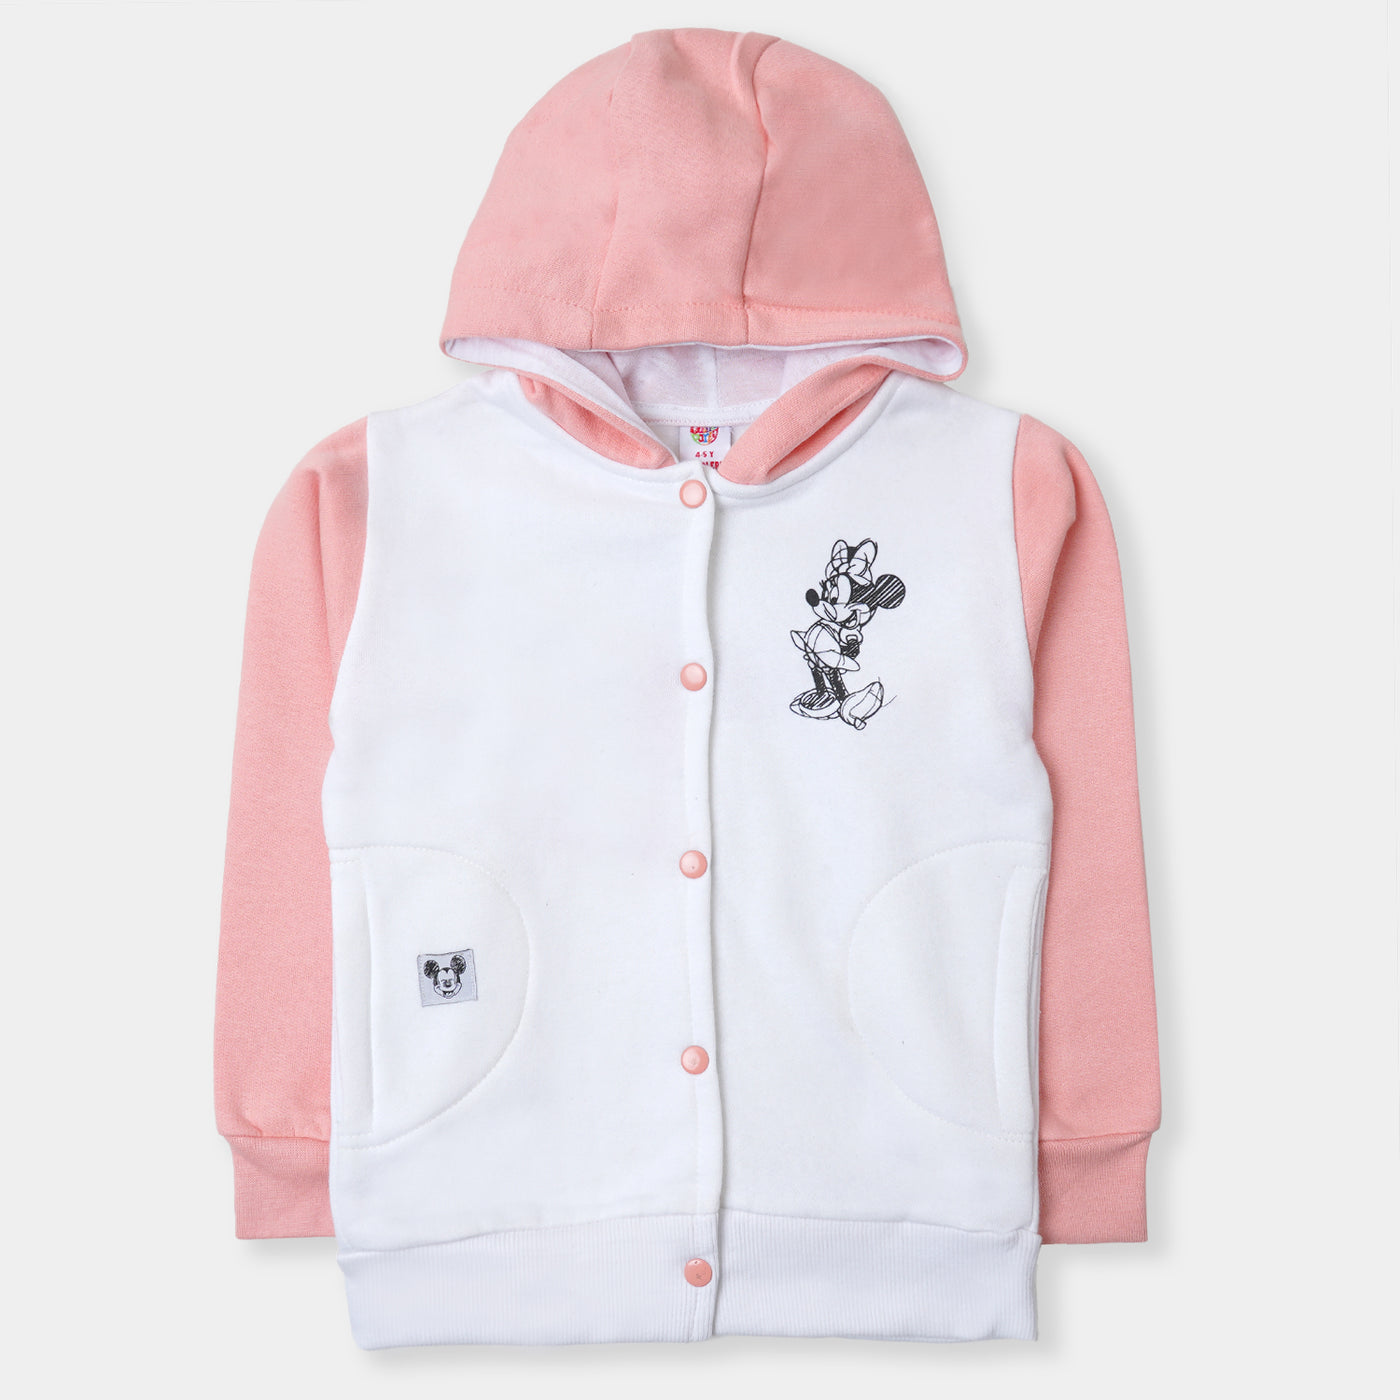 Girls Hooded Knitted Jacket Character Print - White